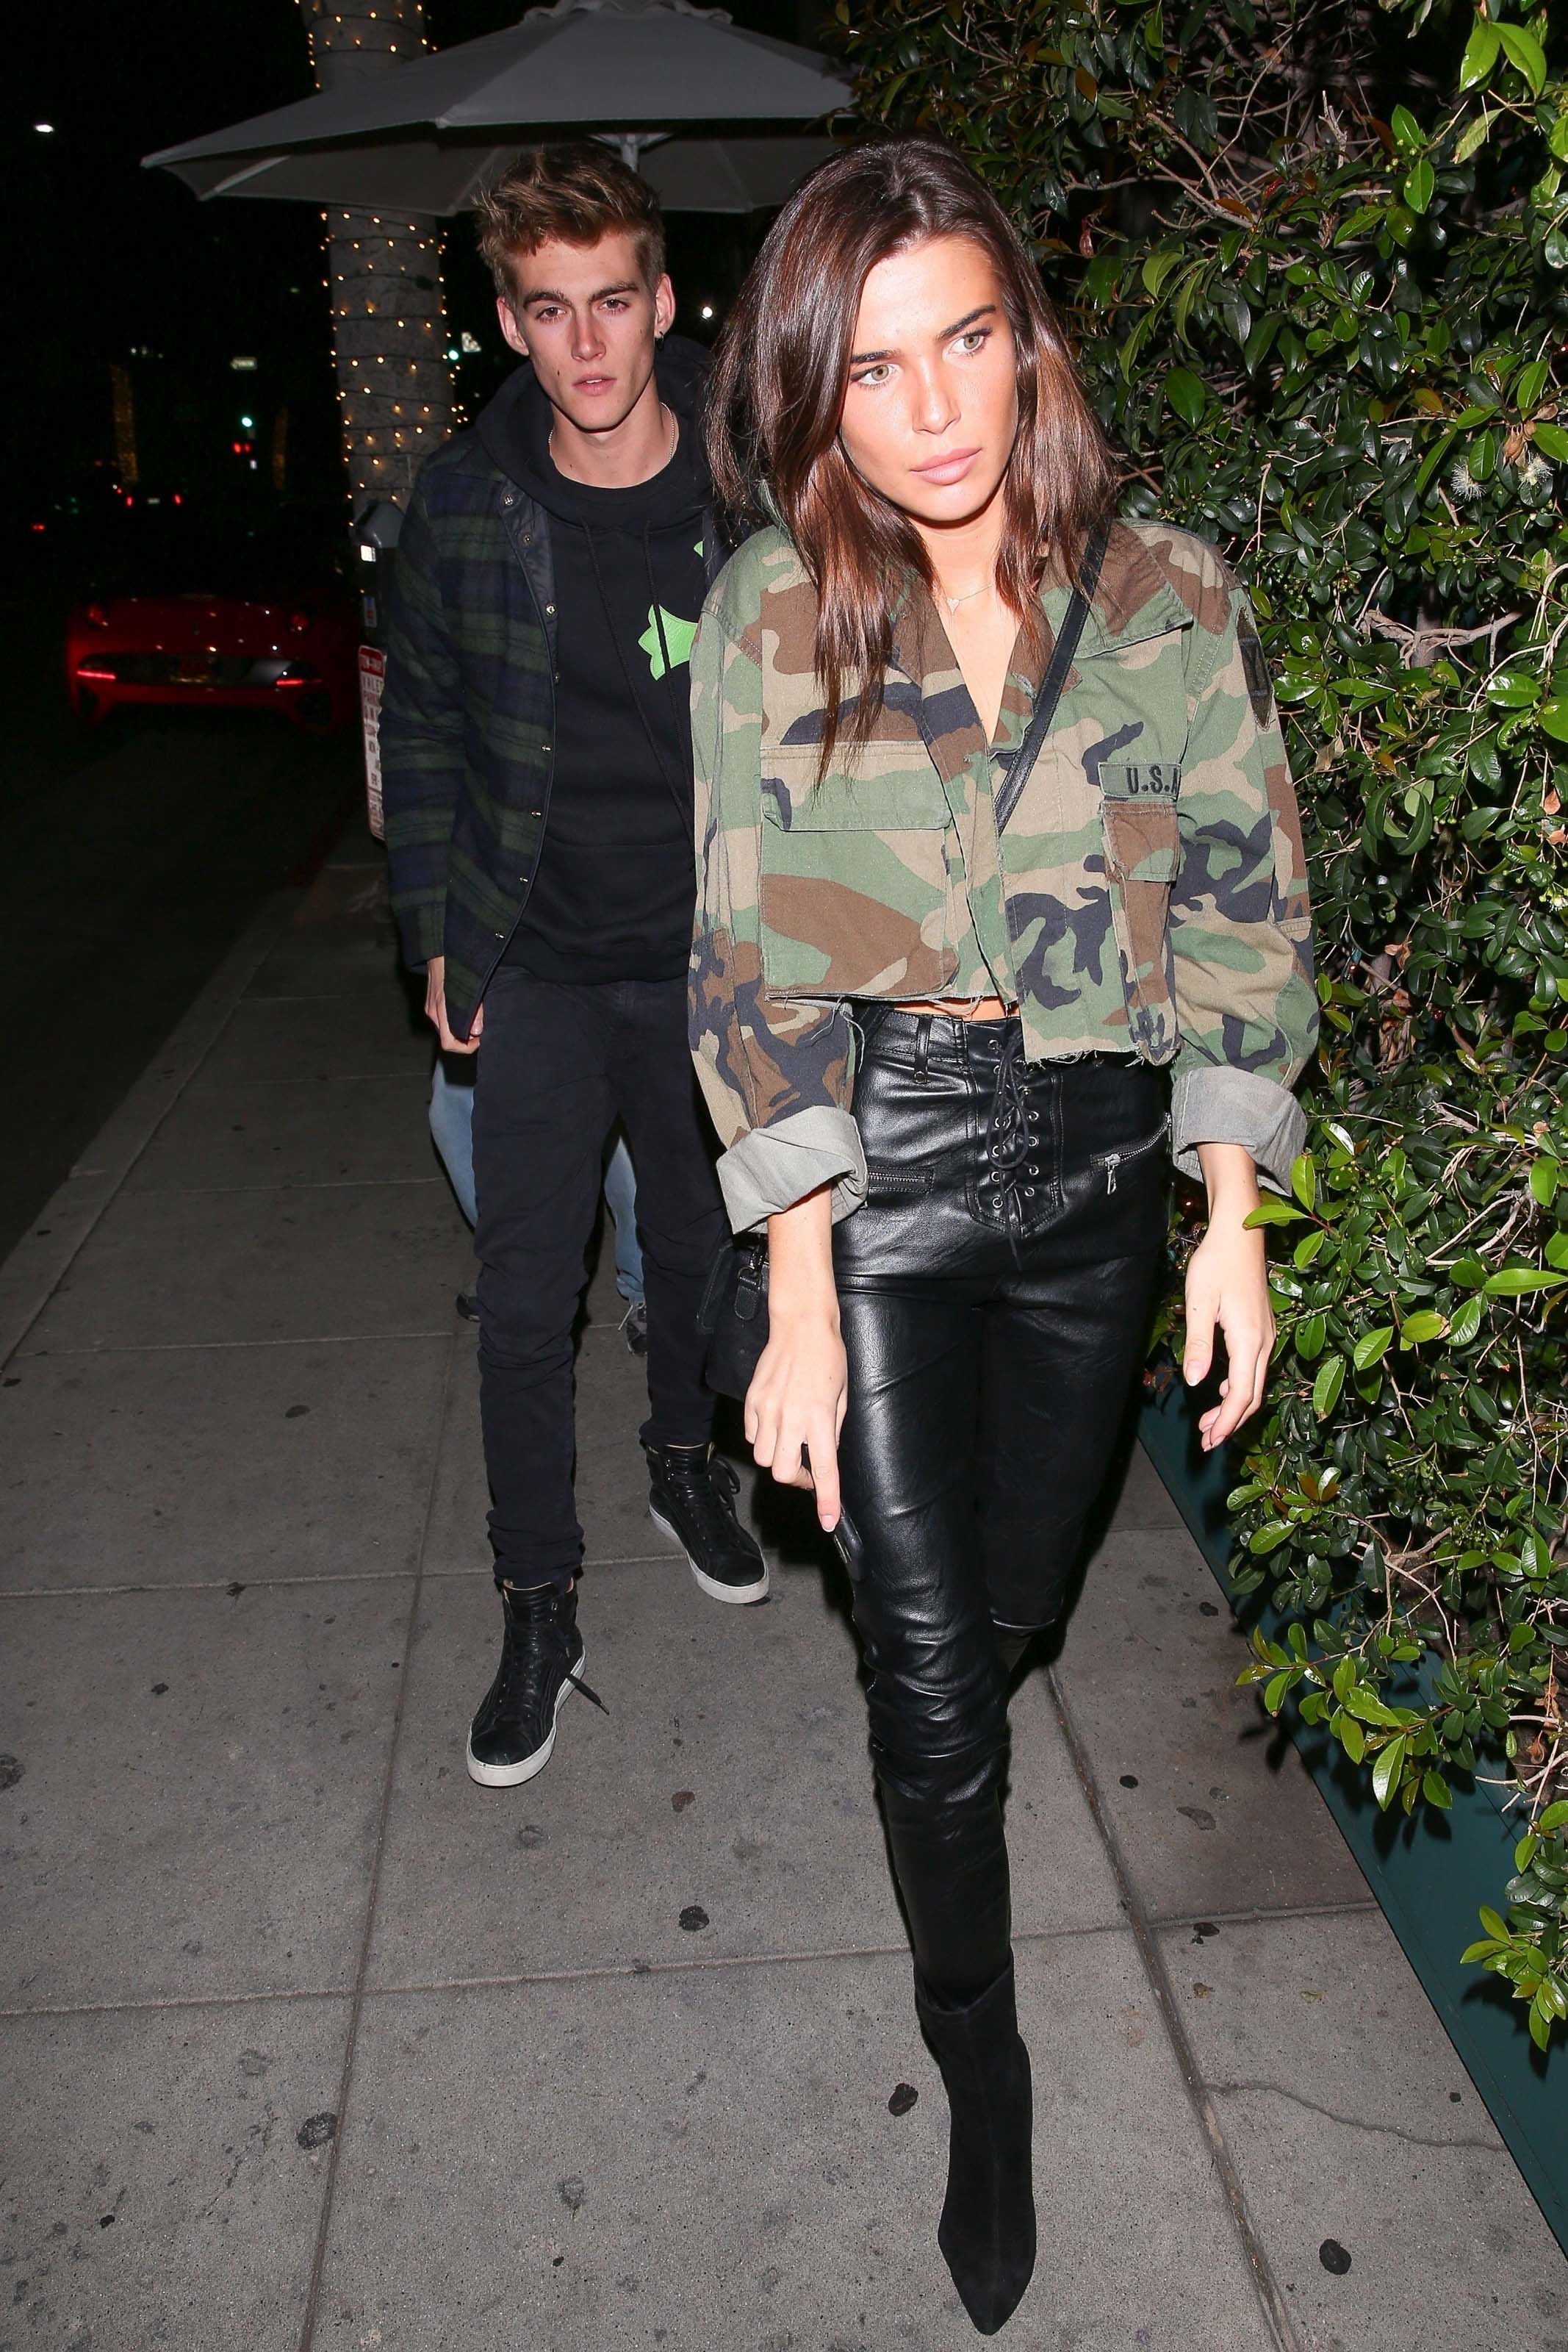 Cayley King at Mr. Chow for Madison Beer’s birthday dinner